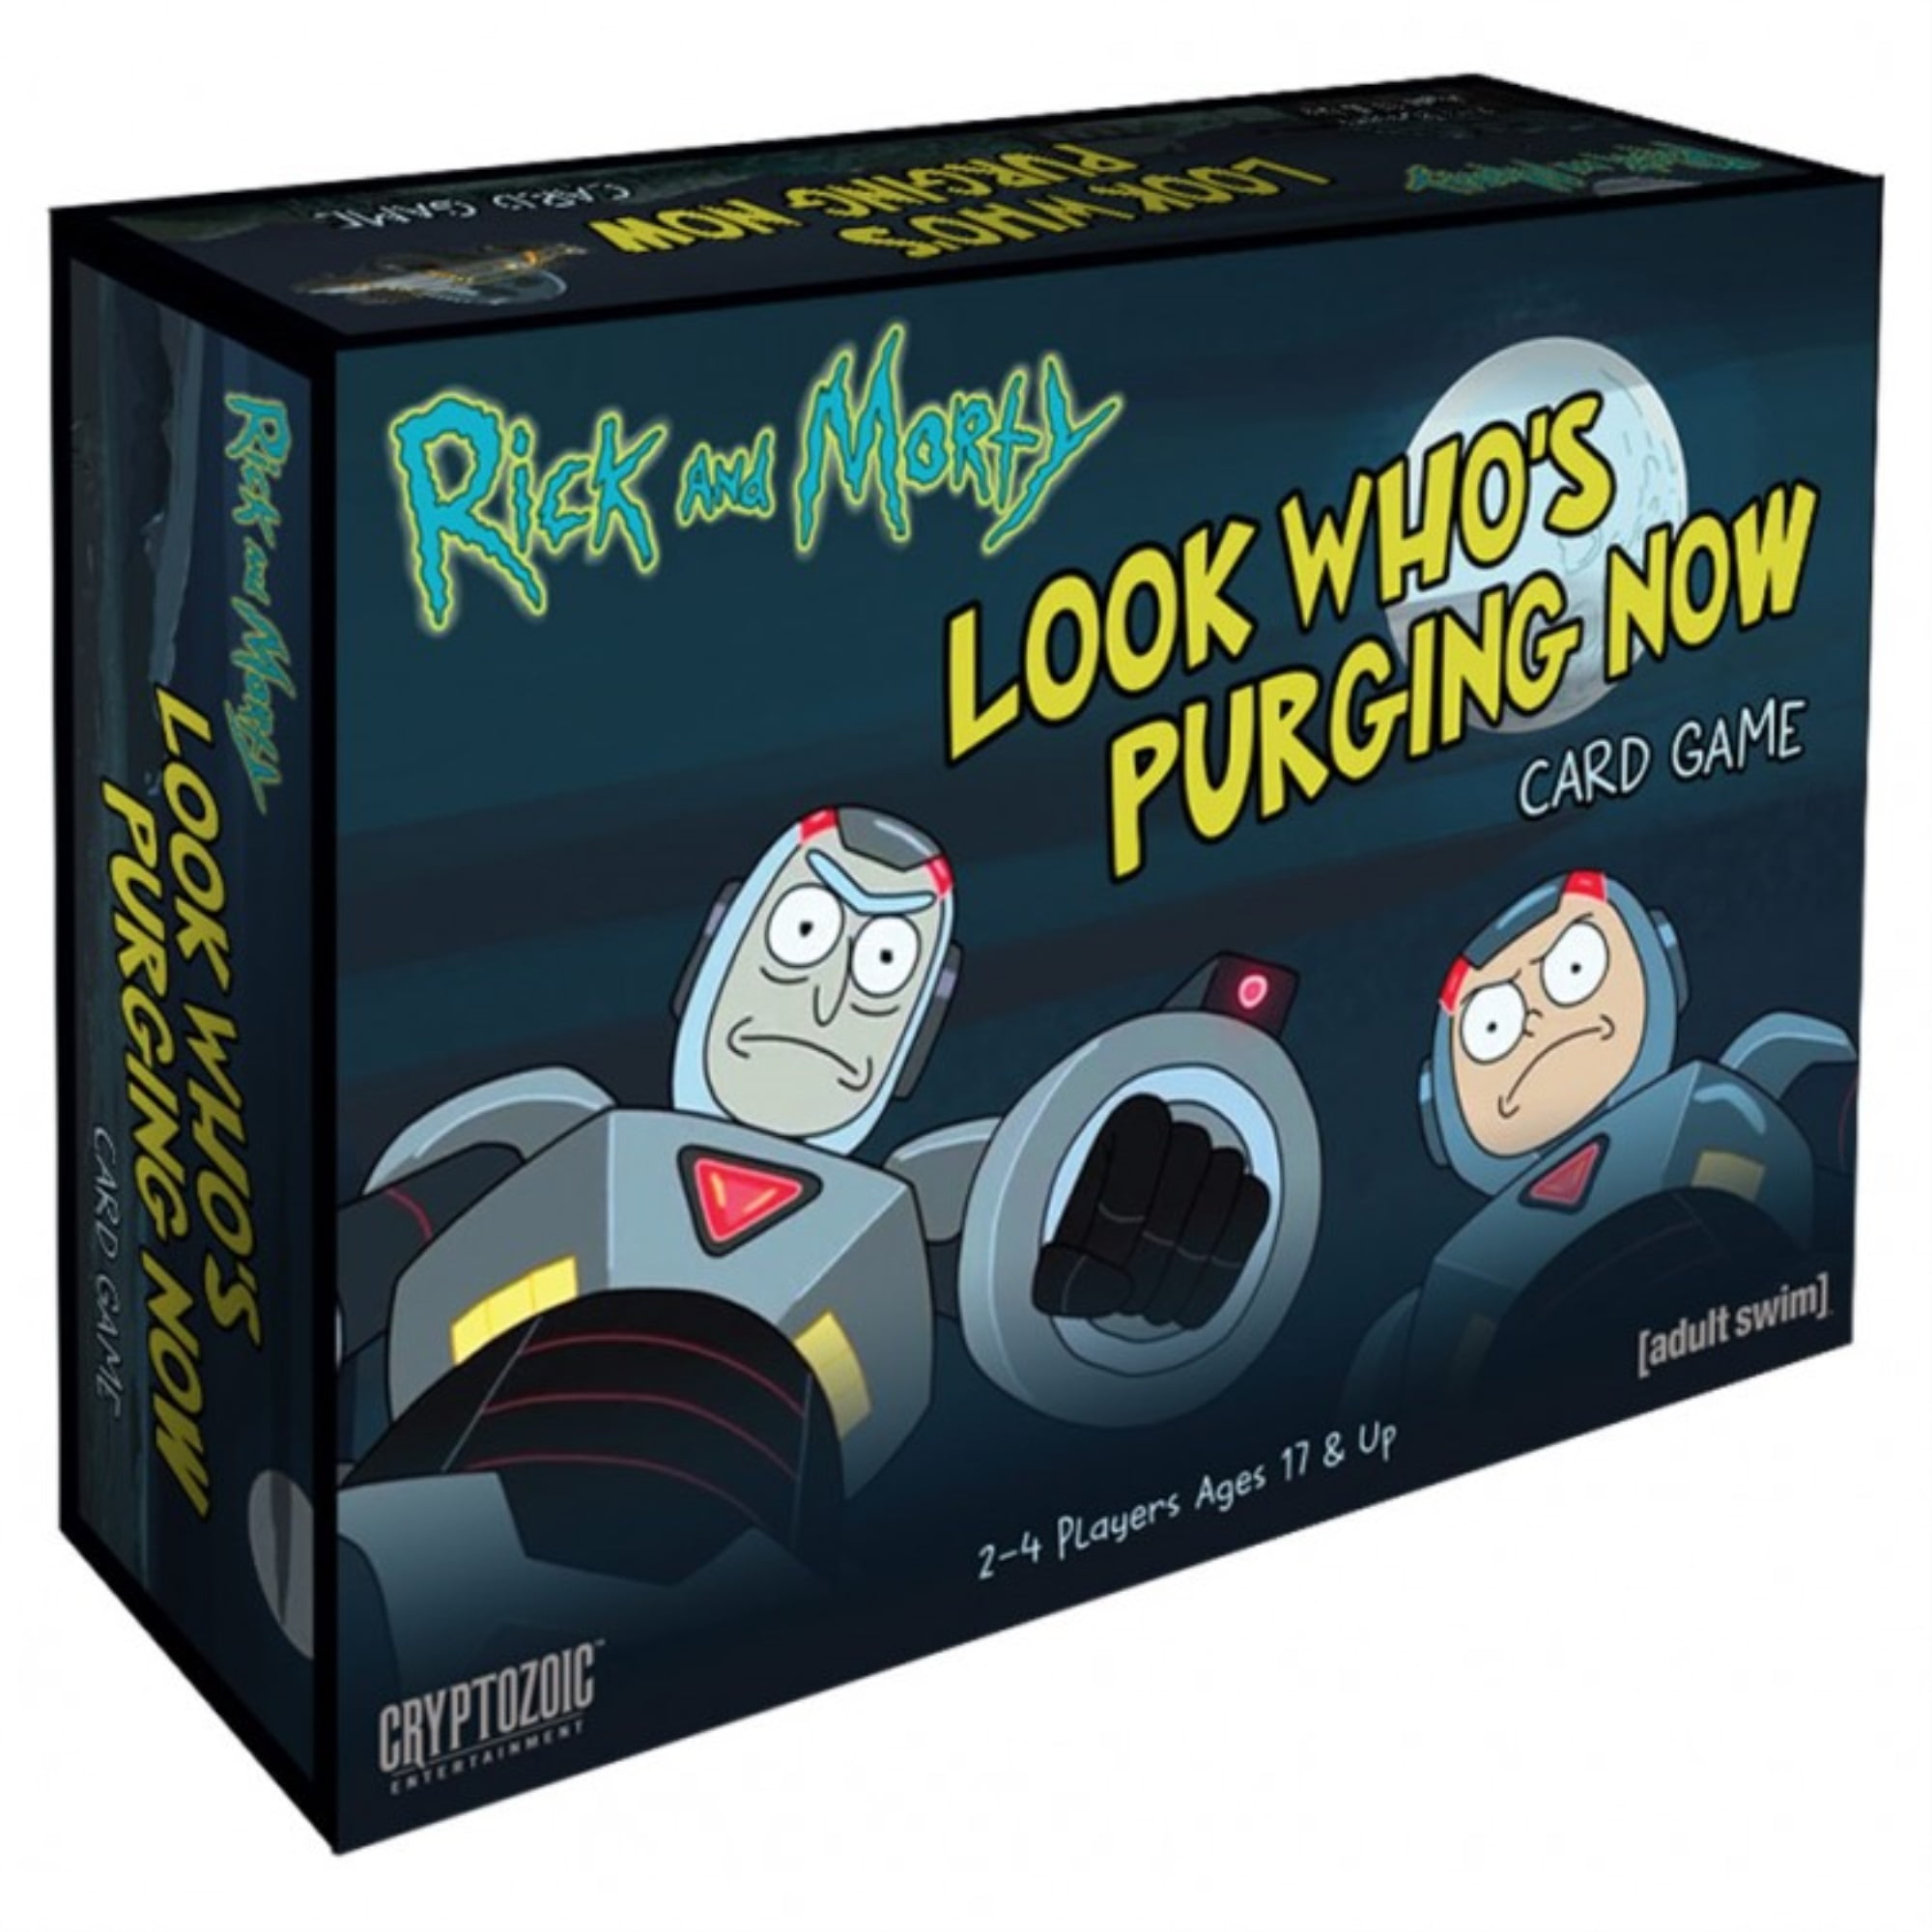 Rick & Morty Look Who's Purging Now Card Game Adult Swim Cryptozoic Board Game 